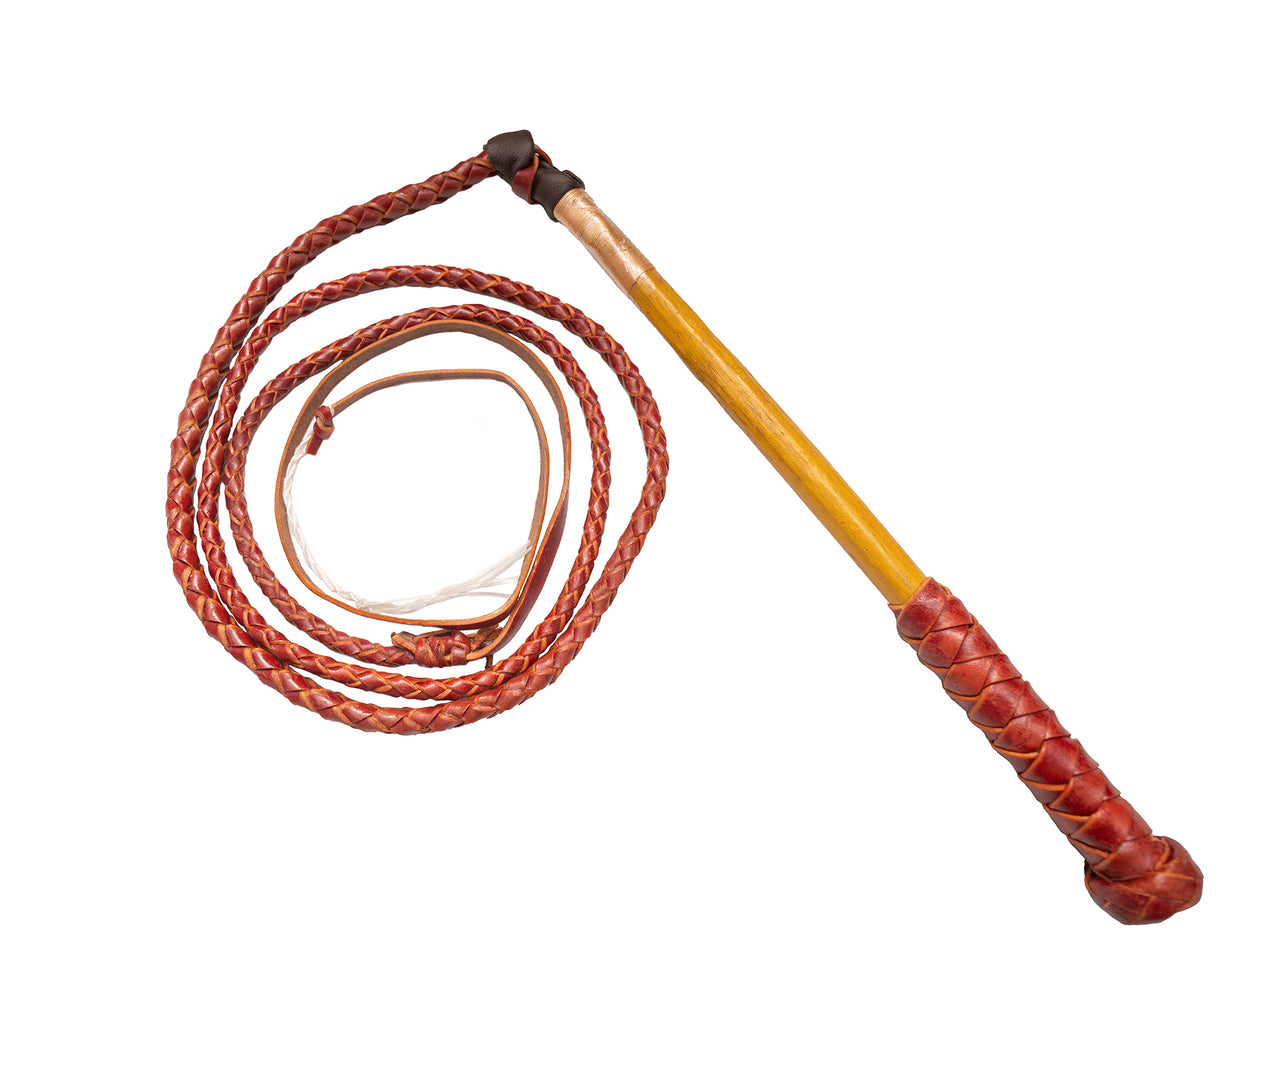 Stockmaster Redhide Stock Whip 5' x 6 Plait - The Trading Stables